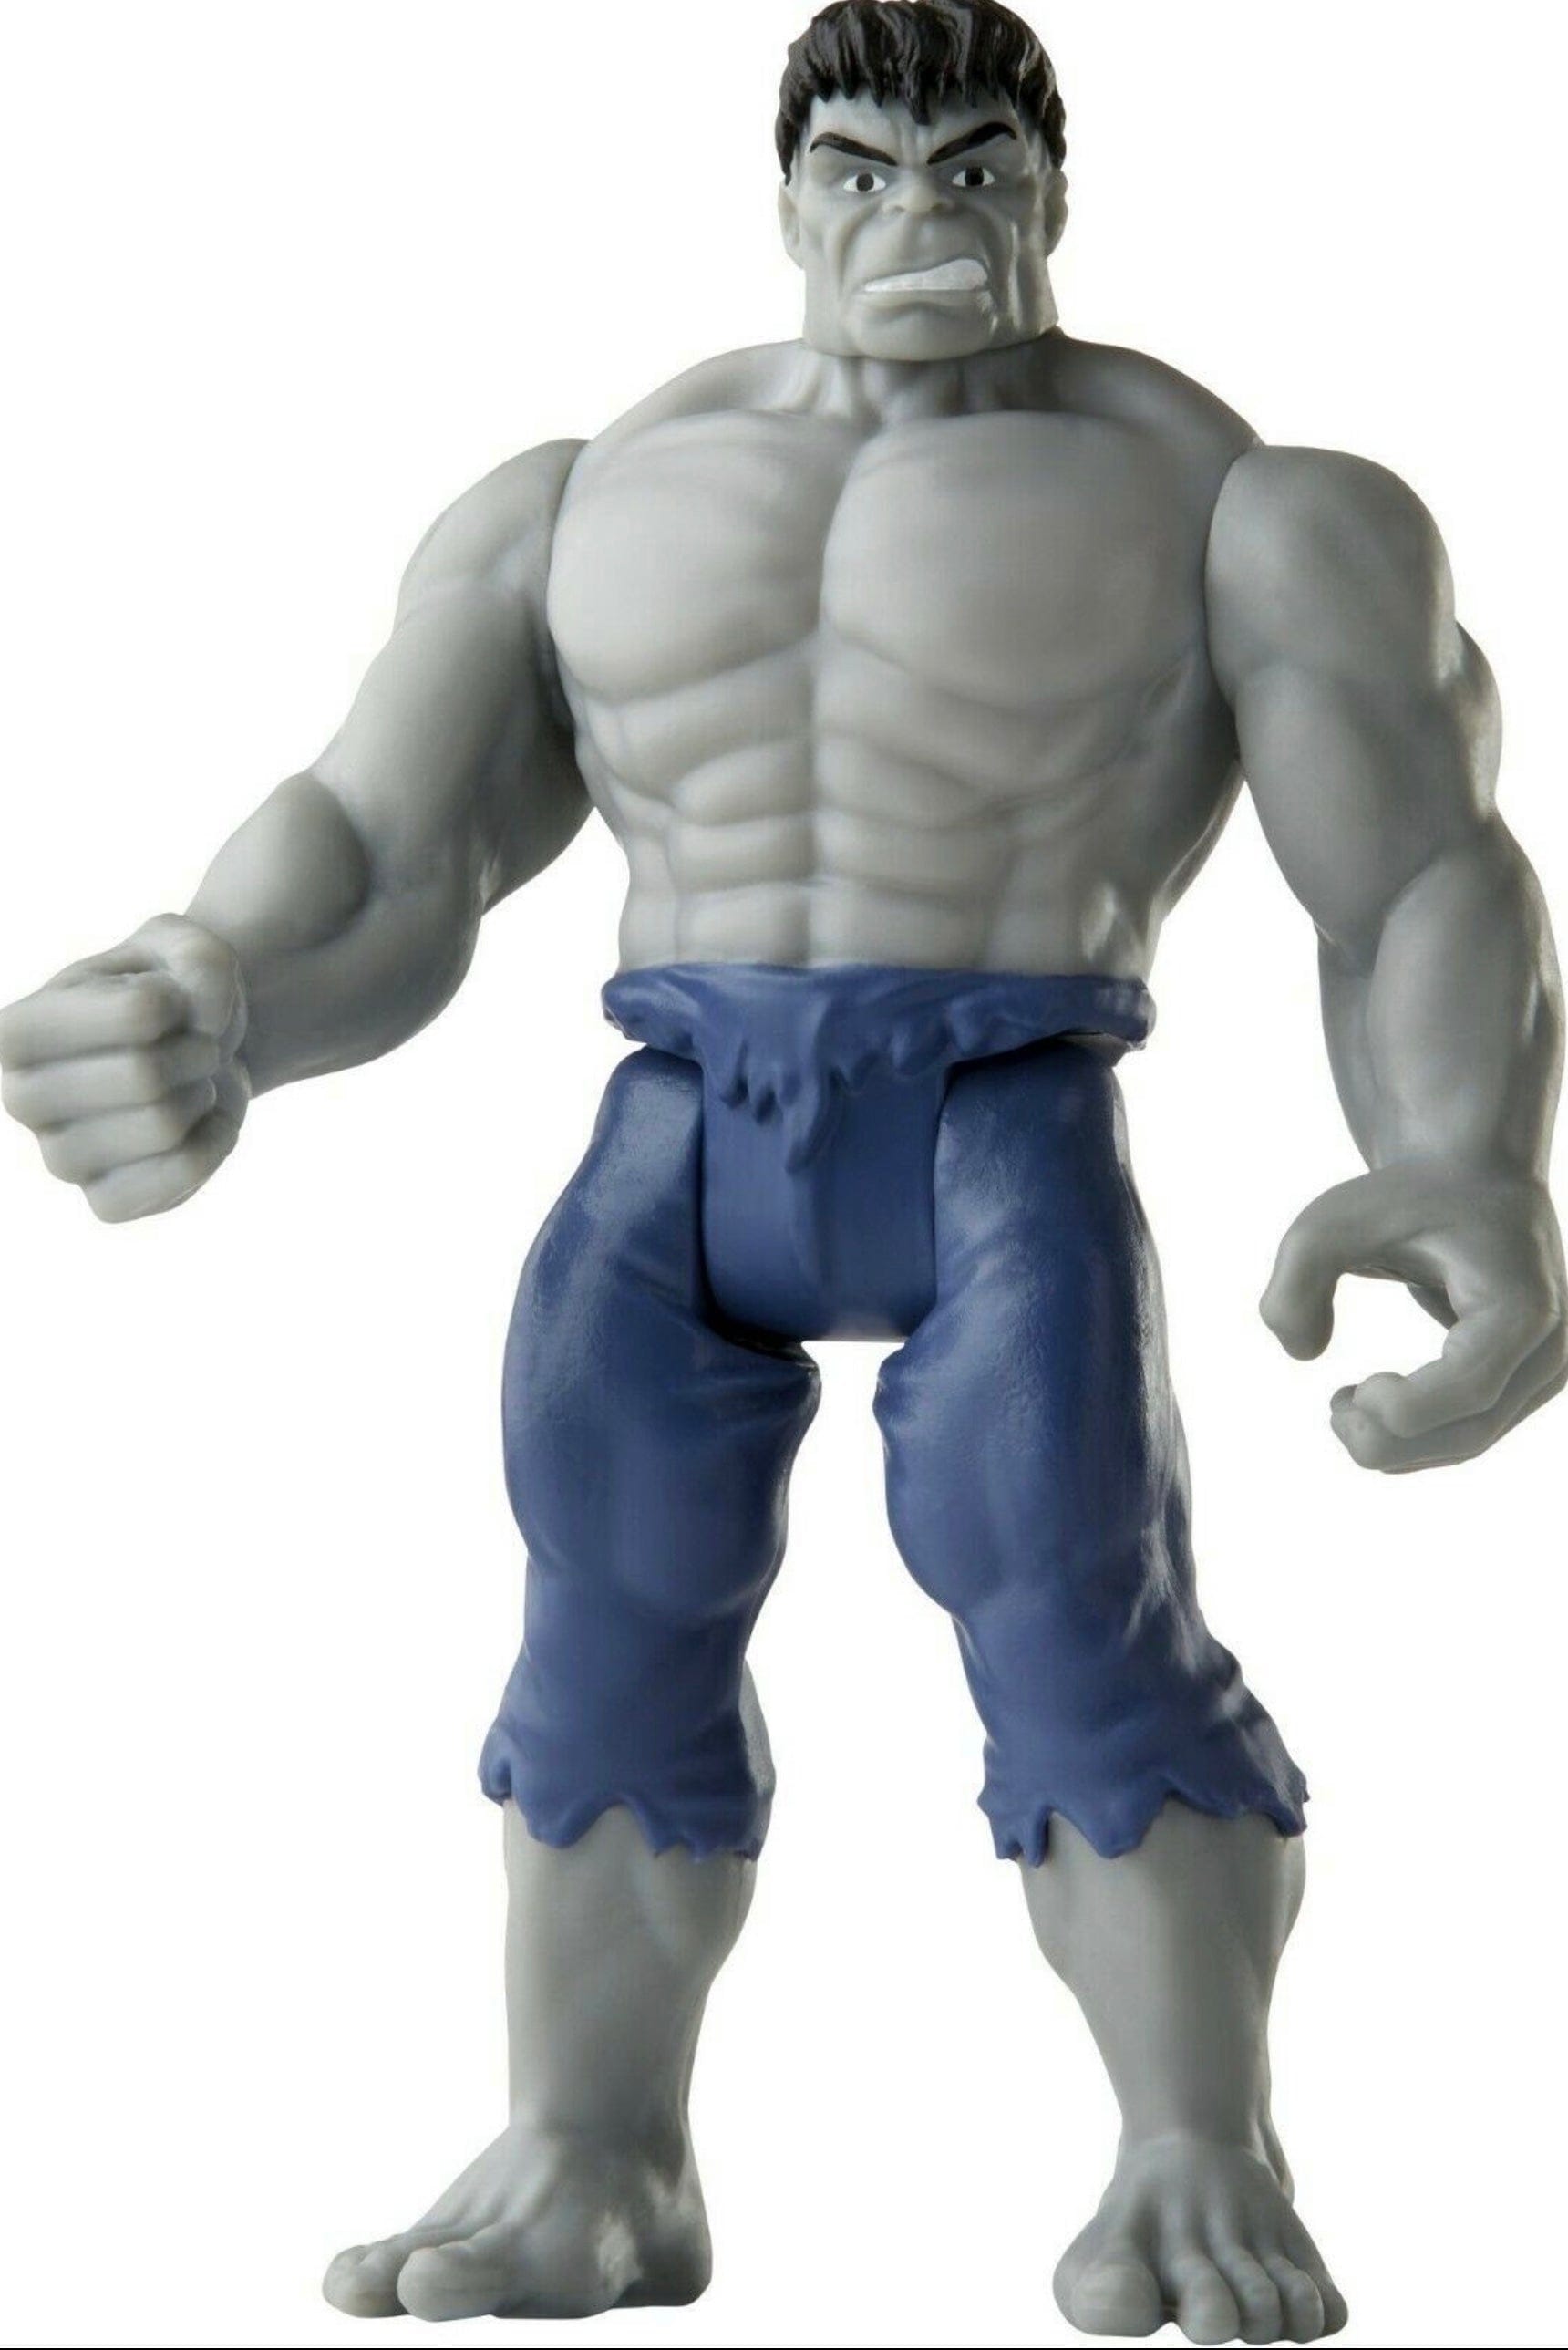 Marvel Legends Retro Recollect Incredible Hulk (Grey) 3.75" Action Figure